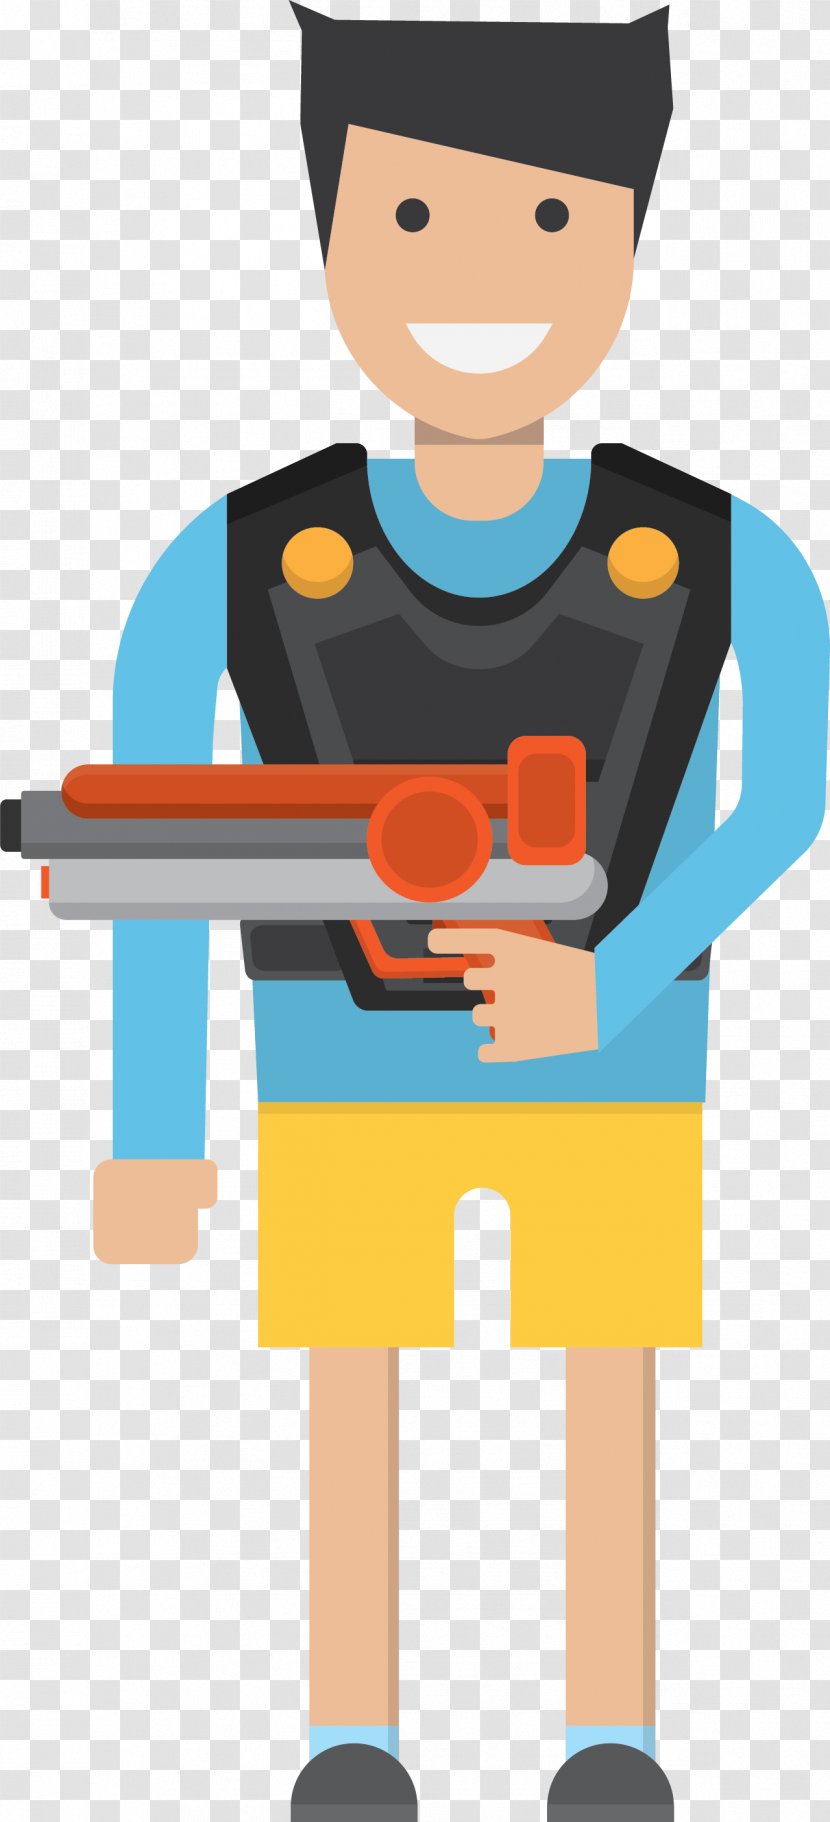 Download - Arm - The Policeman Carried A Gun Transparent PNG